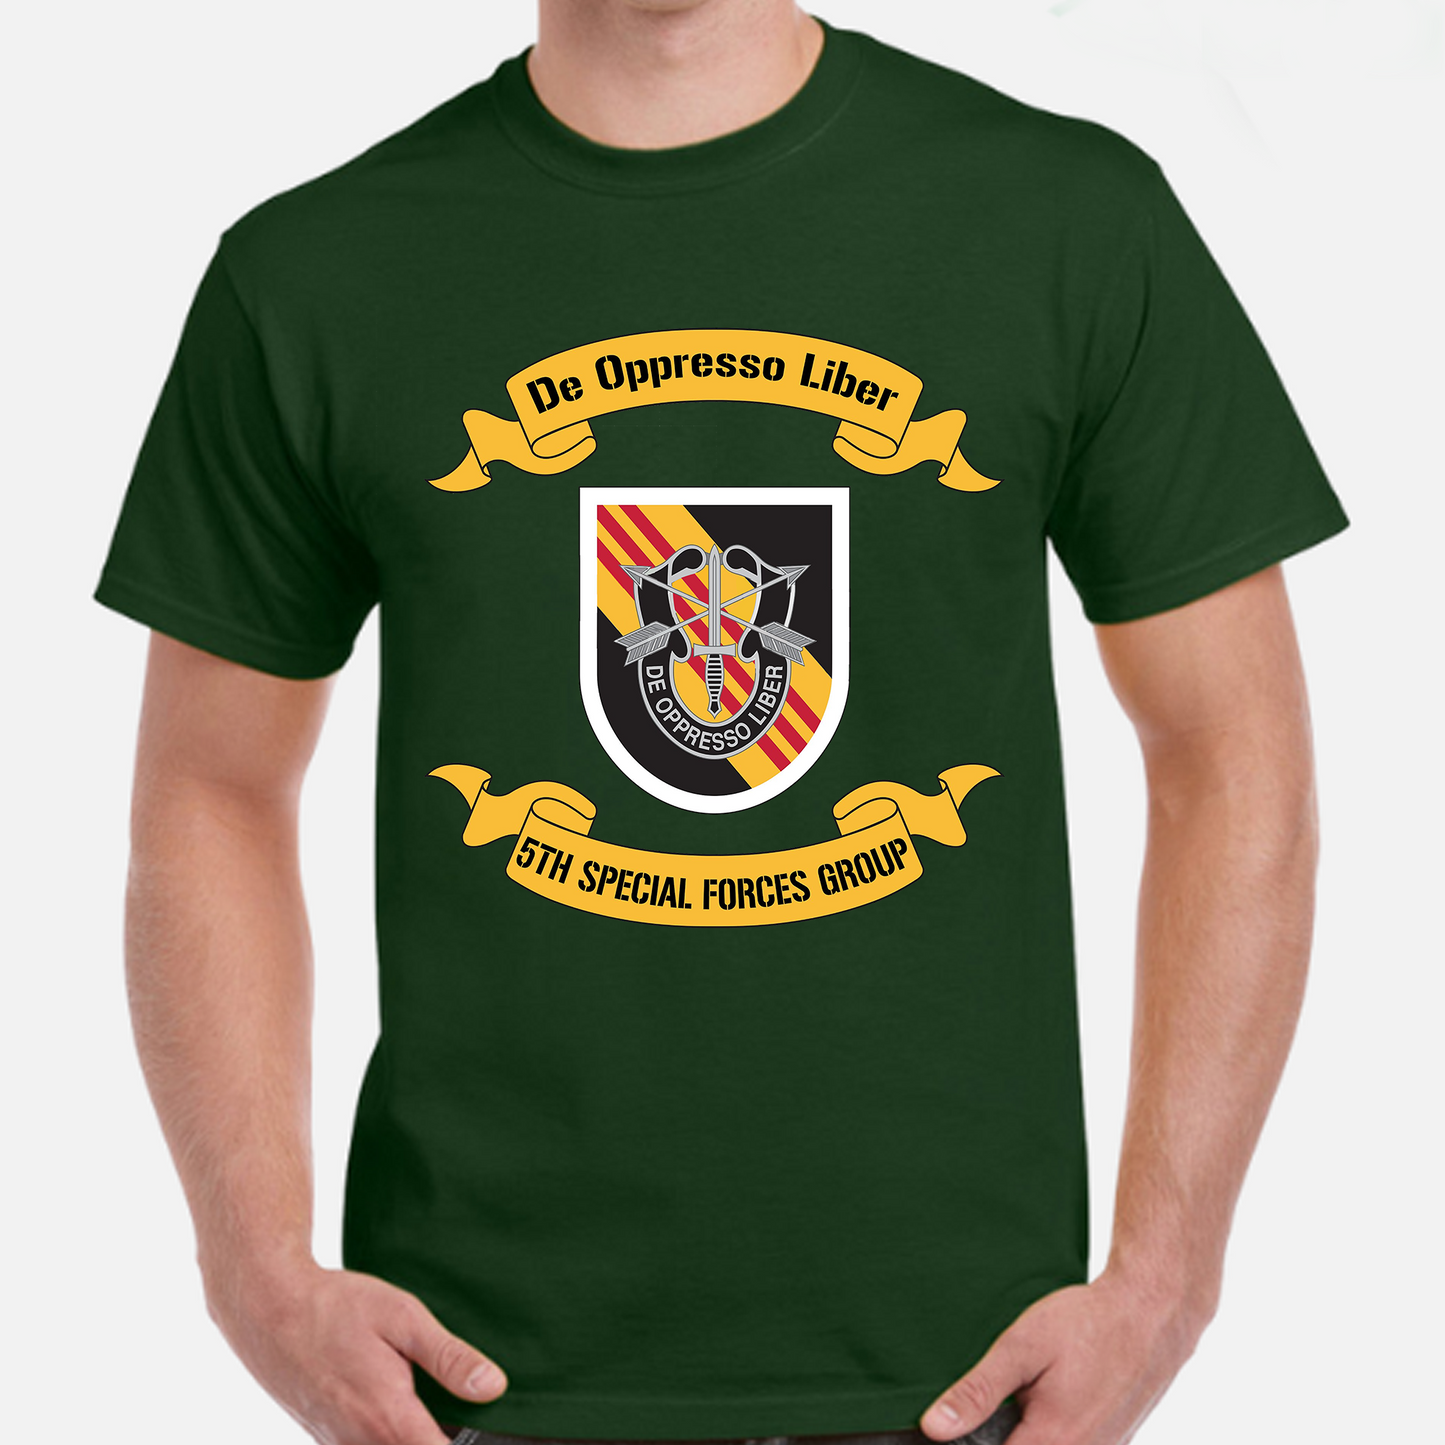 US Army Special Forces 5th Special Forces Group (Airborne) (5th SFG (A)) Classic Unisex T-Shirt Gildan 5000 (Made In US) DLHH1304PT02